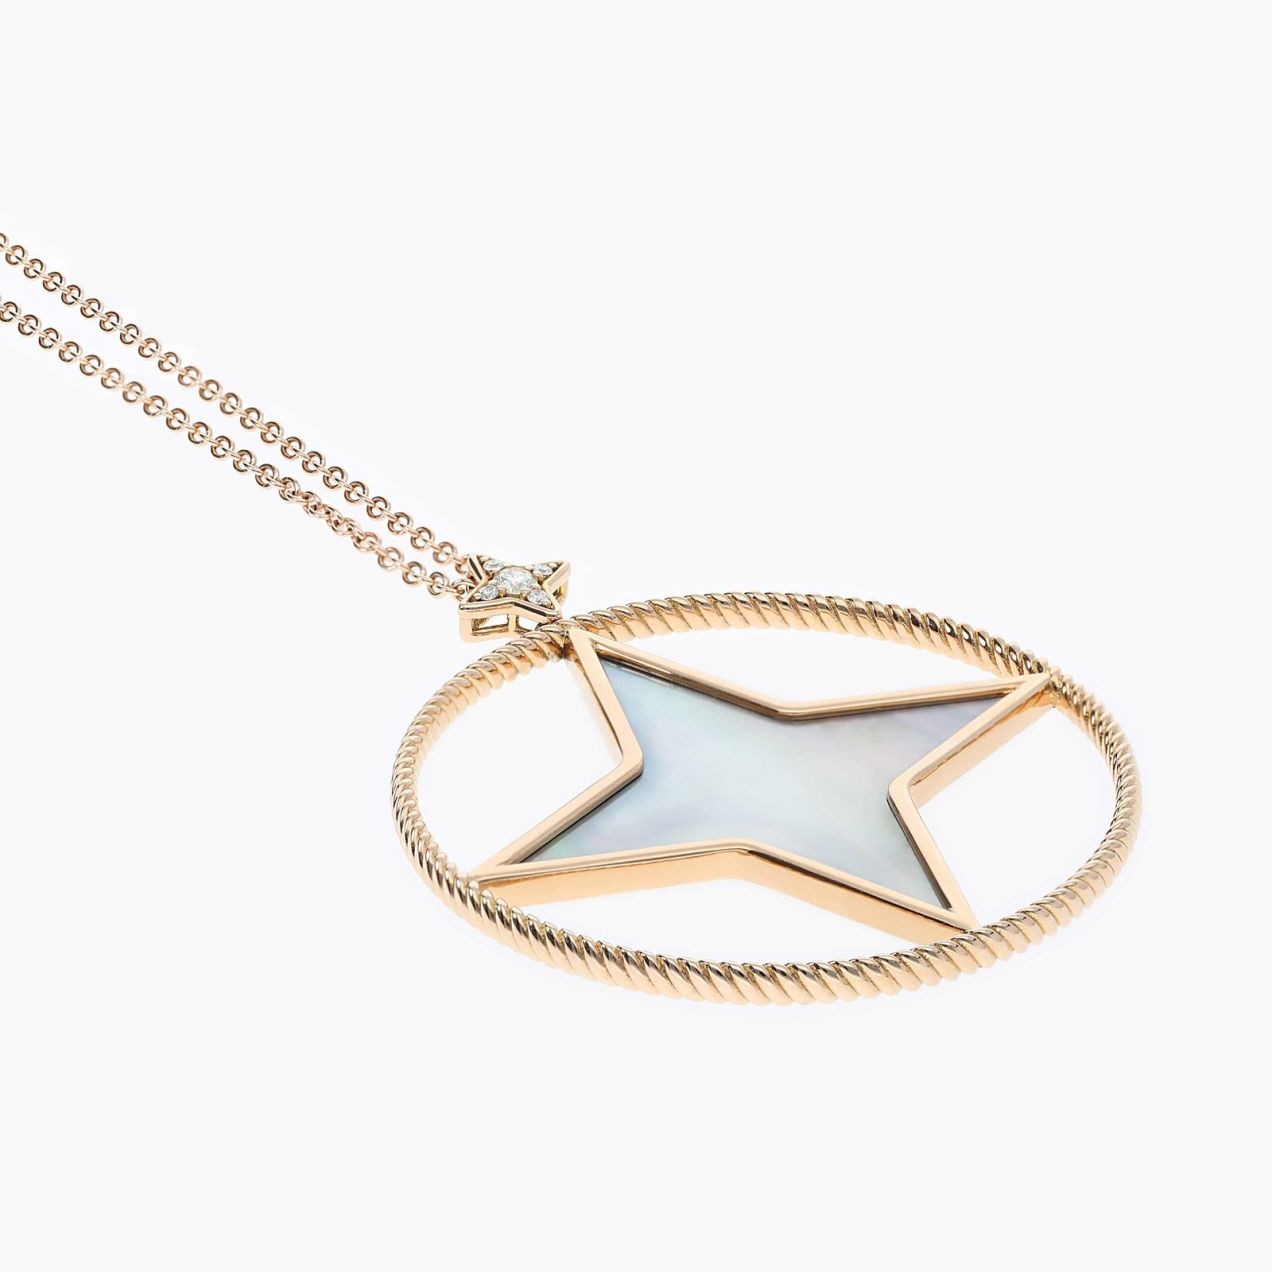 Circular star pendant in rose gold with central pearl and diamonds